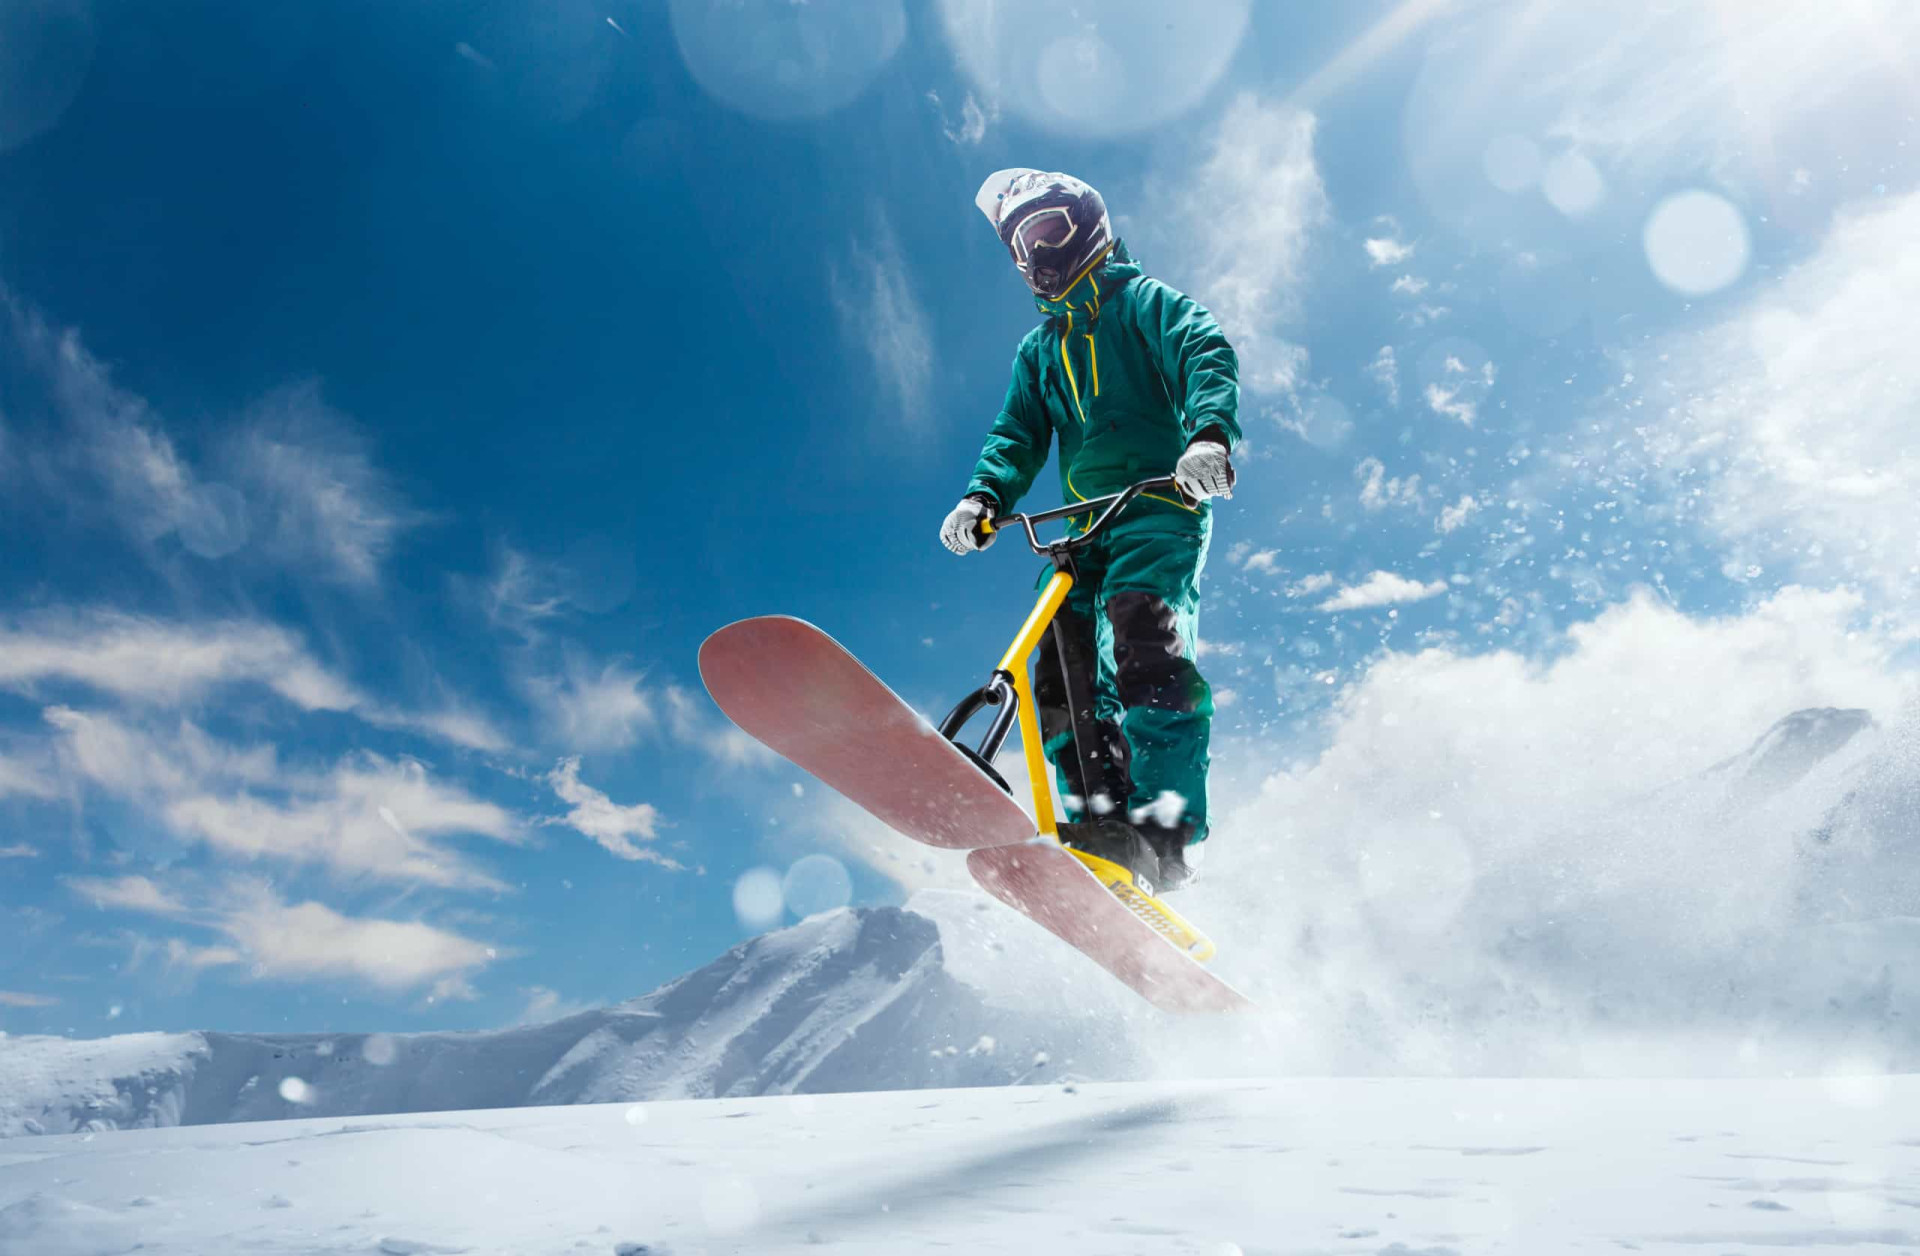 How cool are these unusual winter activities?